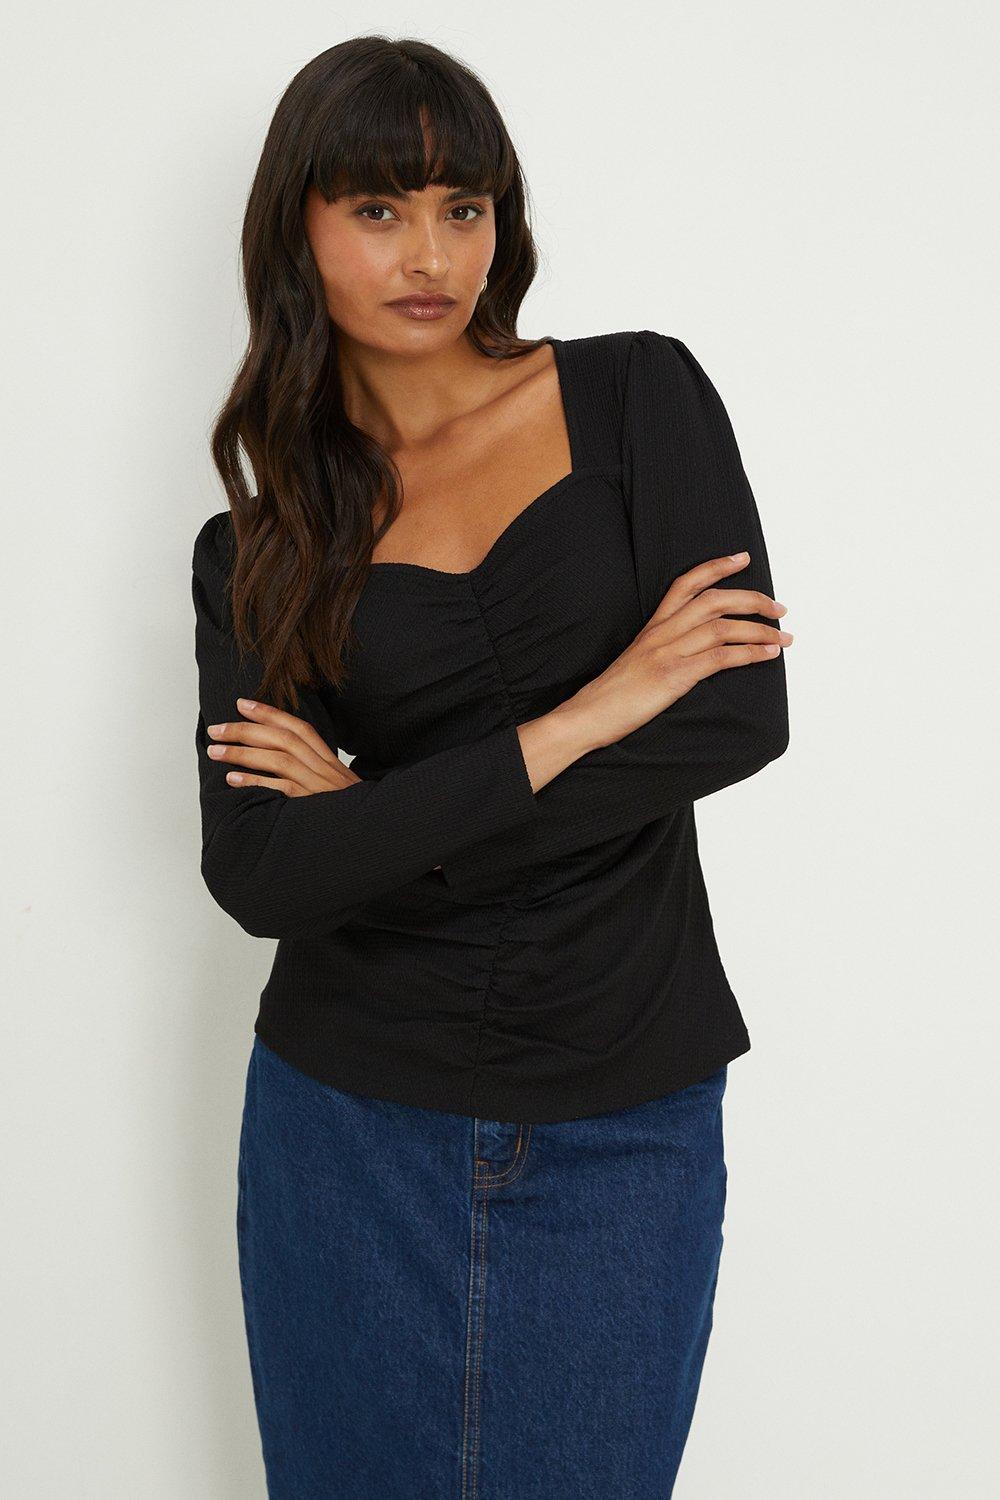 Women's Black Sweetheart Ruched Body Long Sleeve Top - L